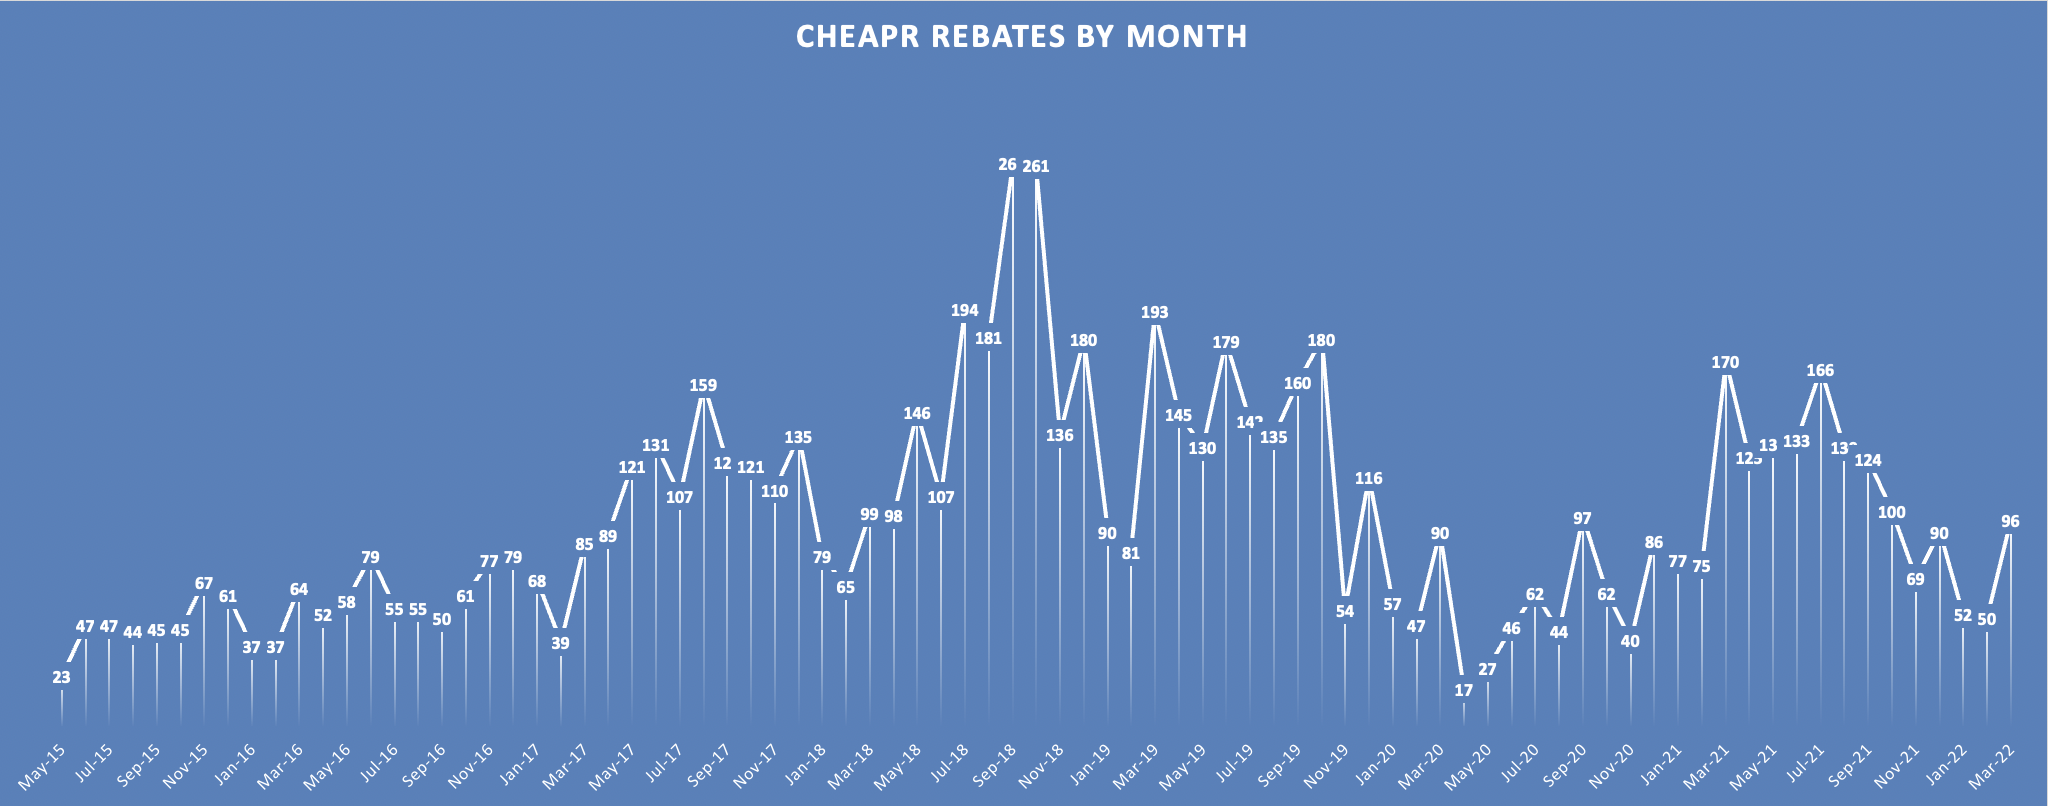 CHEAPR Rebates by Month Through March 2022